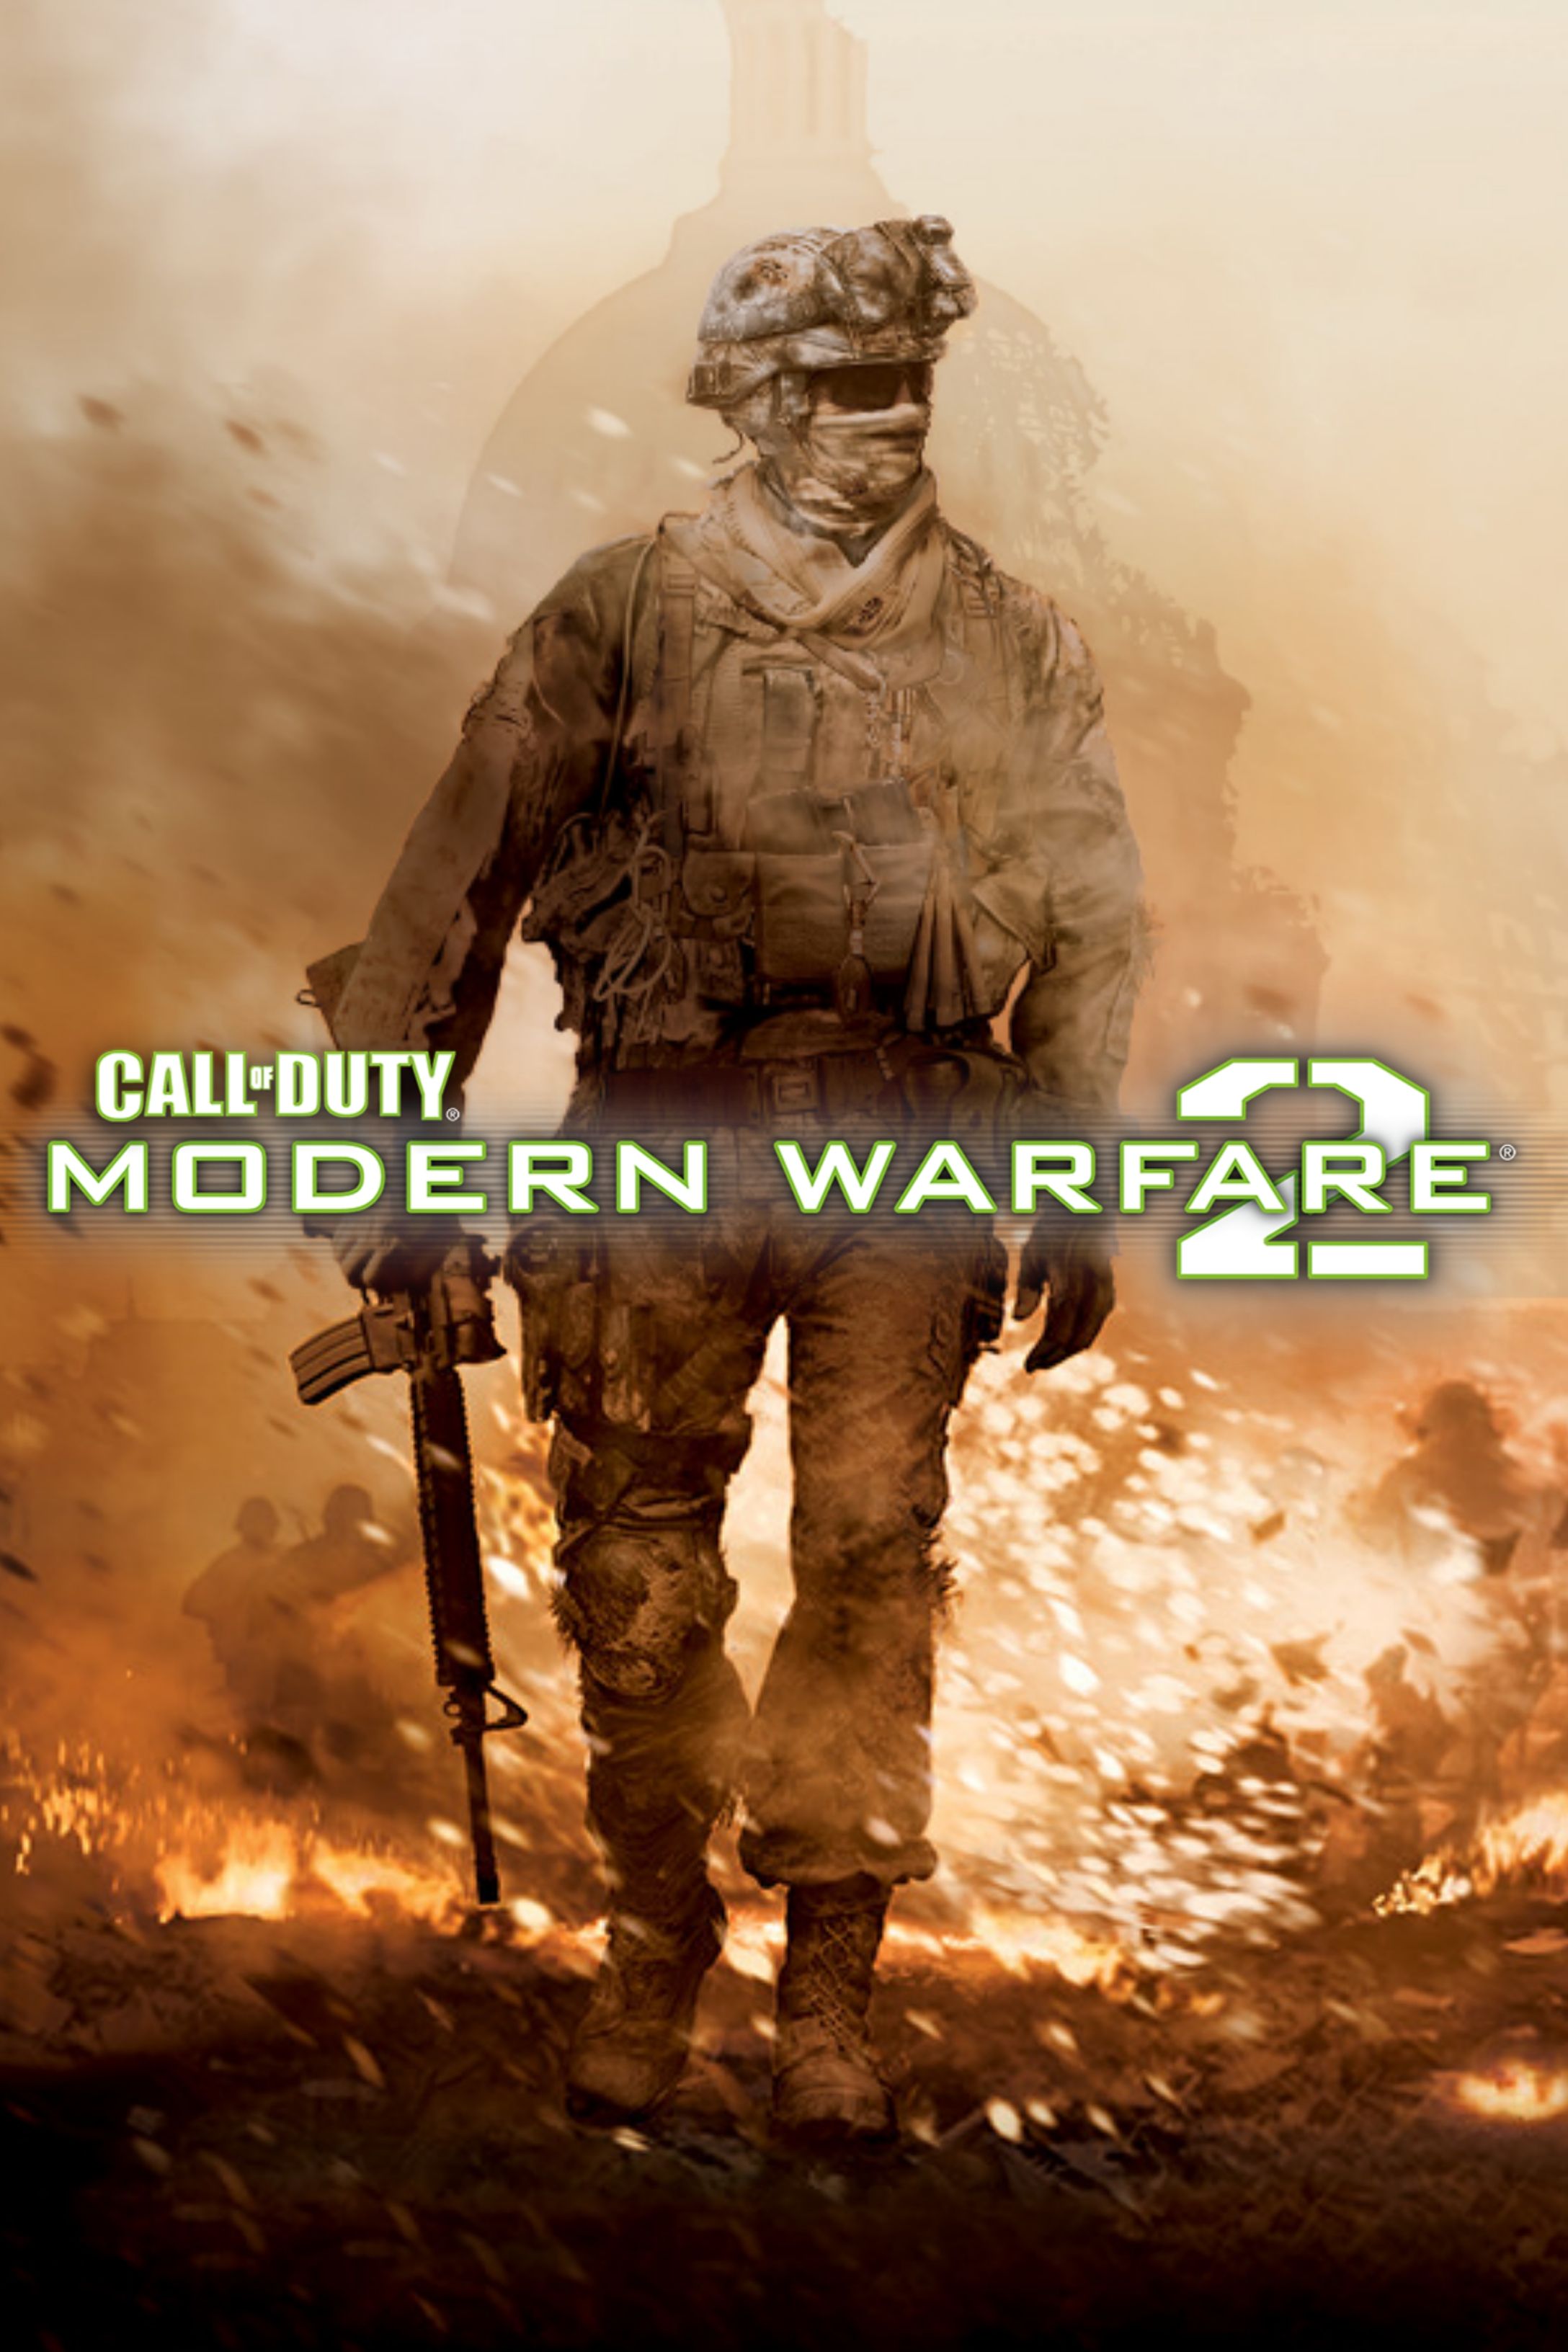 Call of Duty Modern Warfare 2 (2009) Poster Showing a Soldier walking Away from the Capitol Building